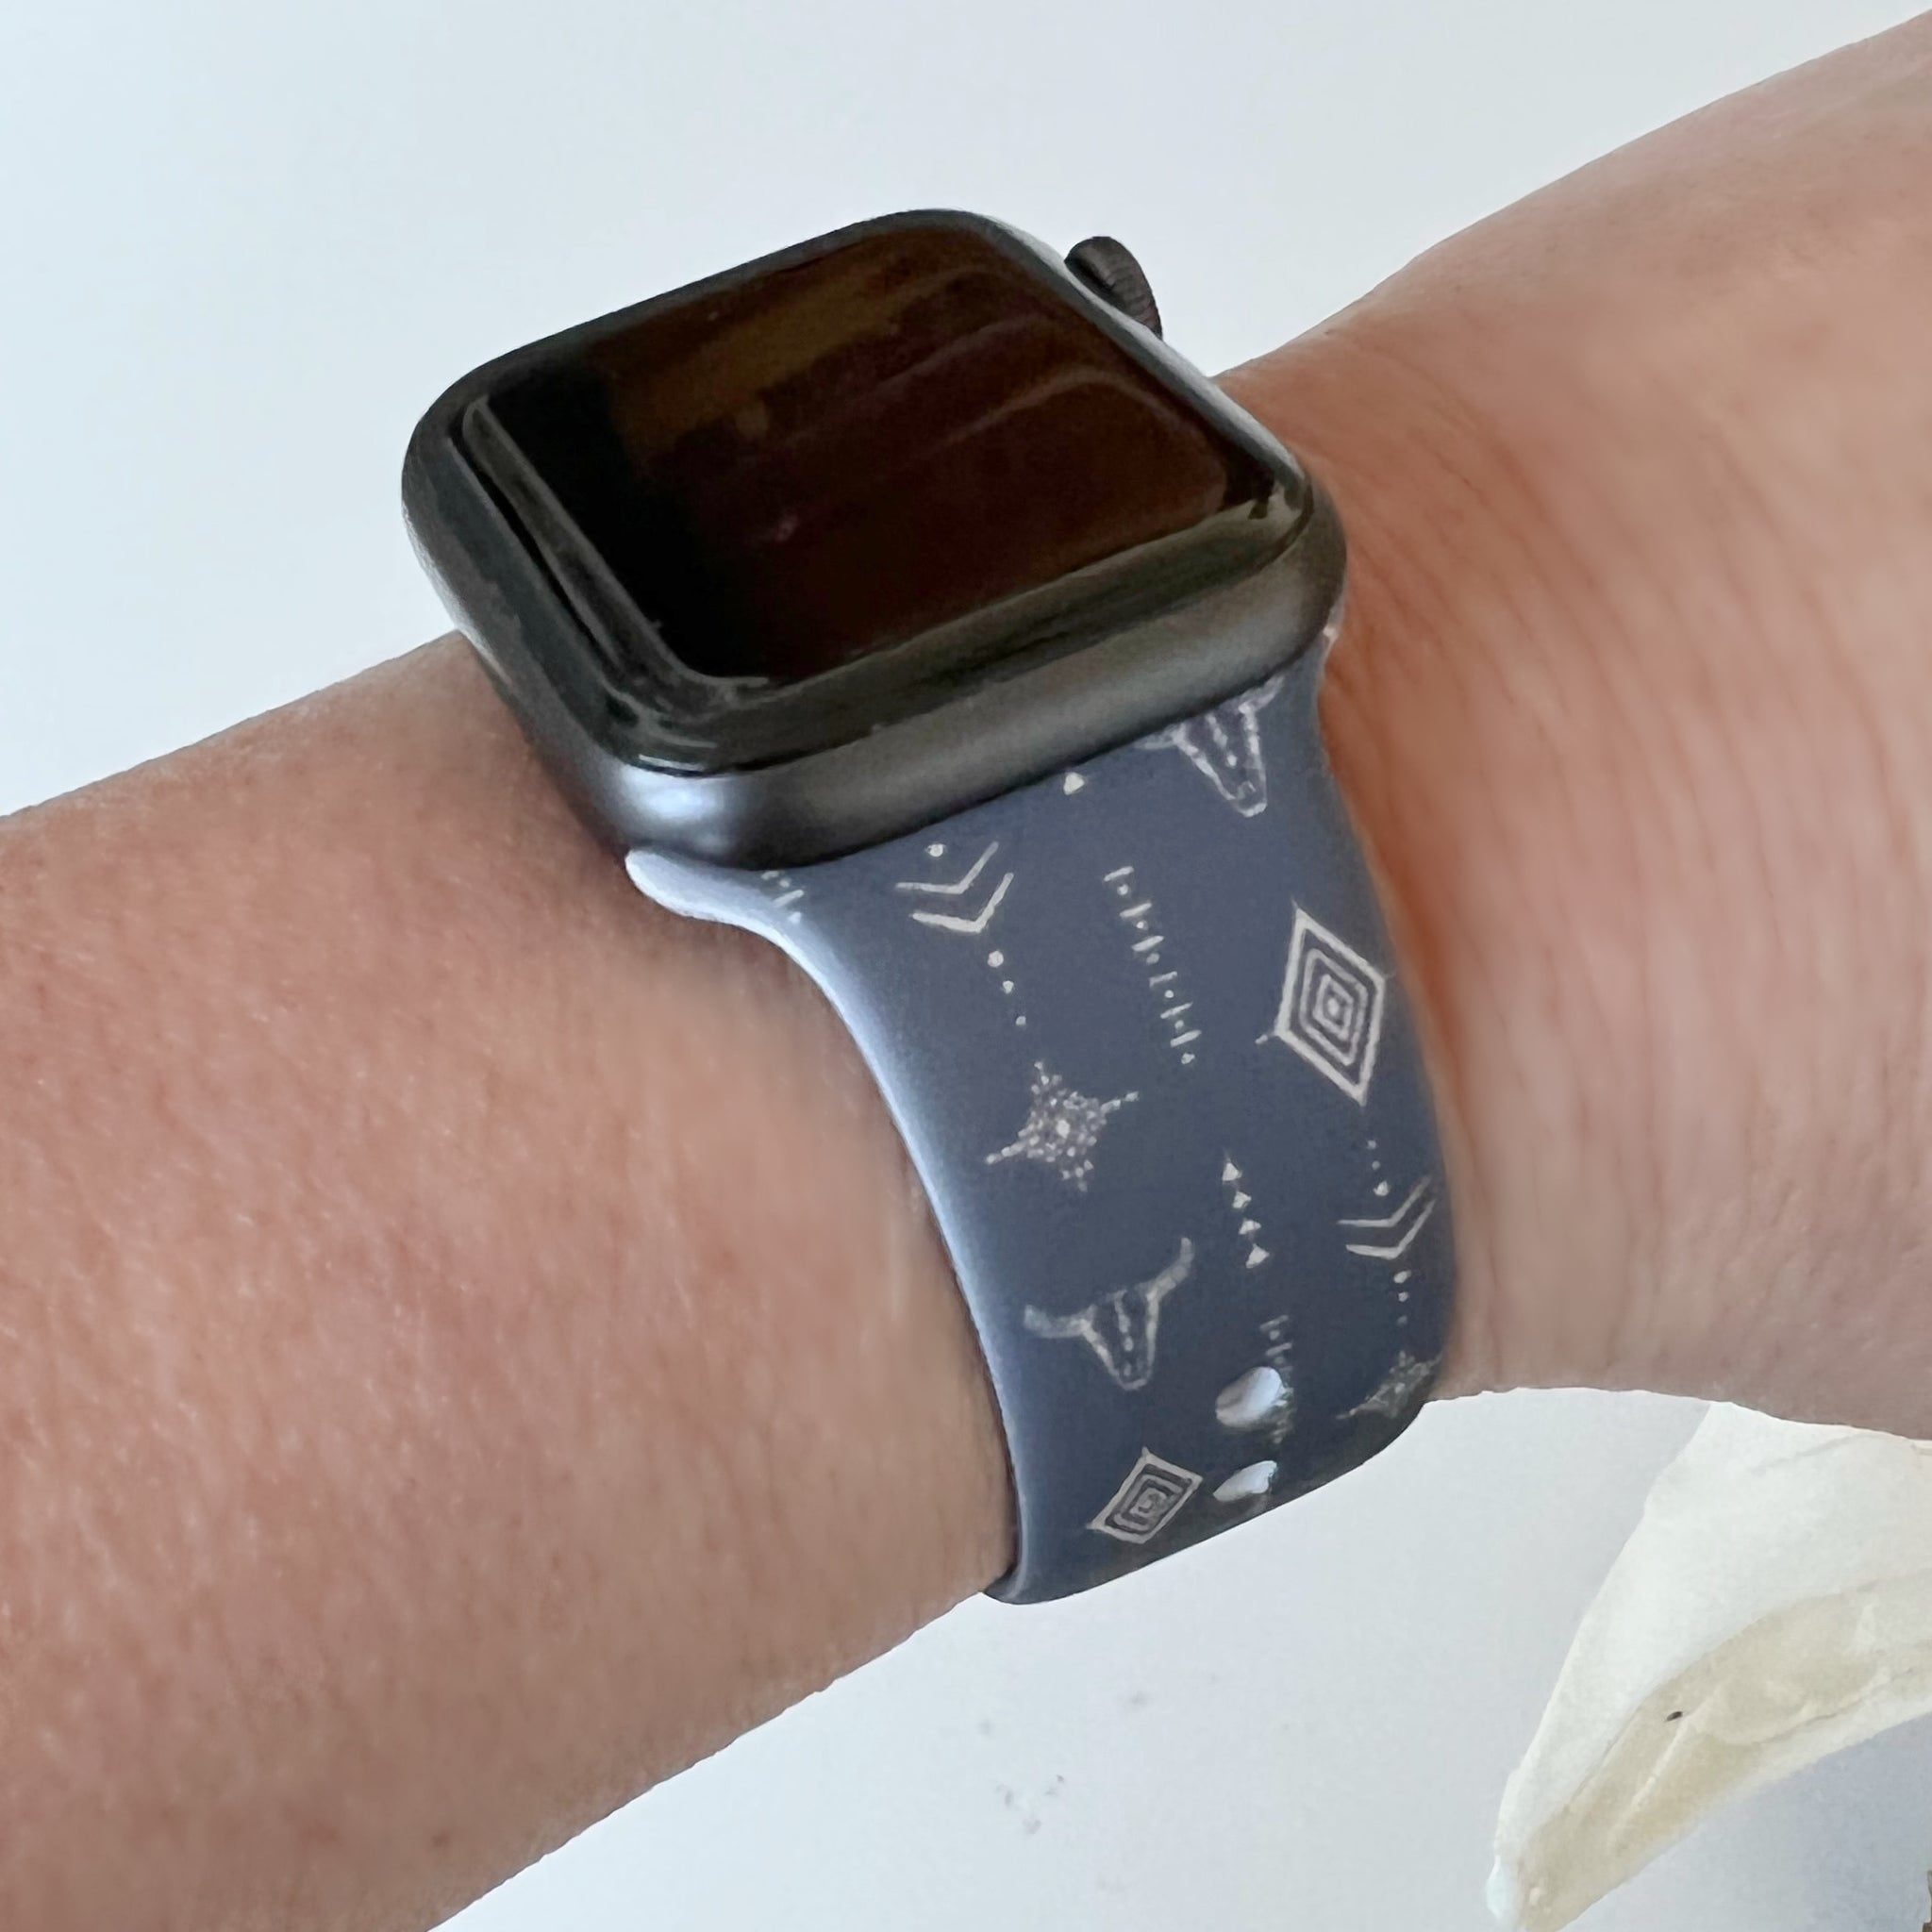 Western Watch Bands for Apple Watch – Salty USA